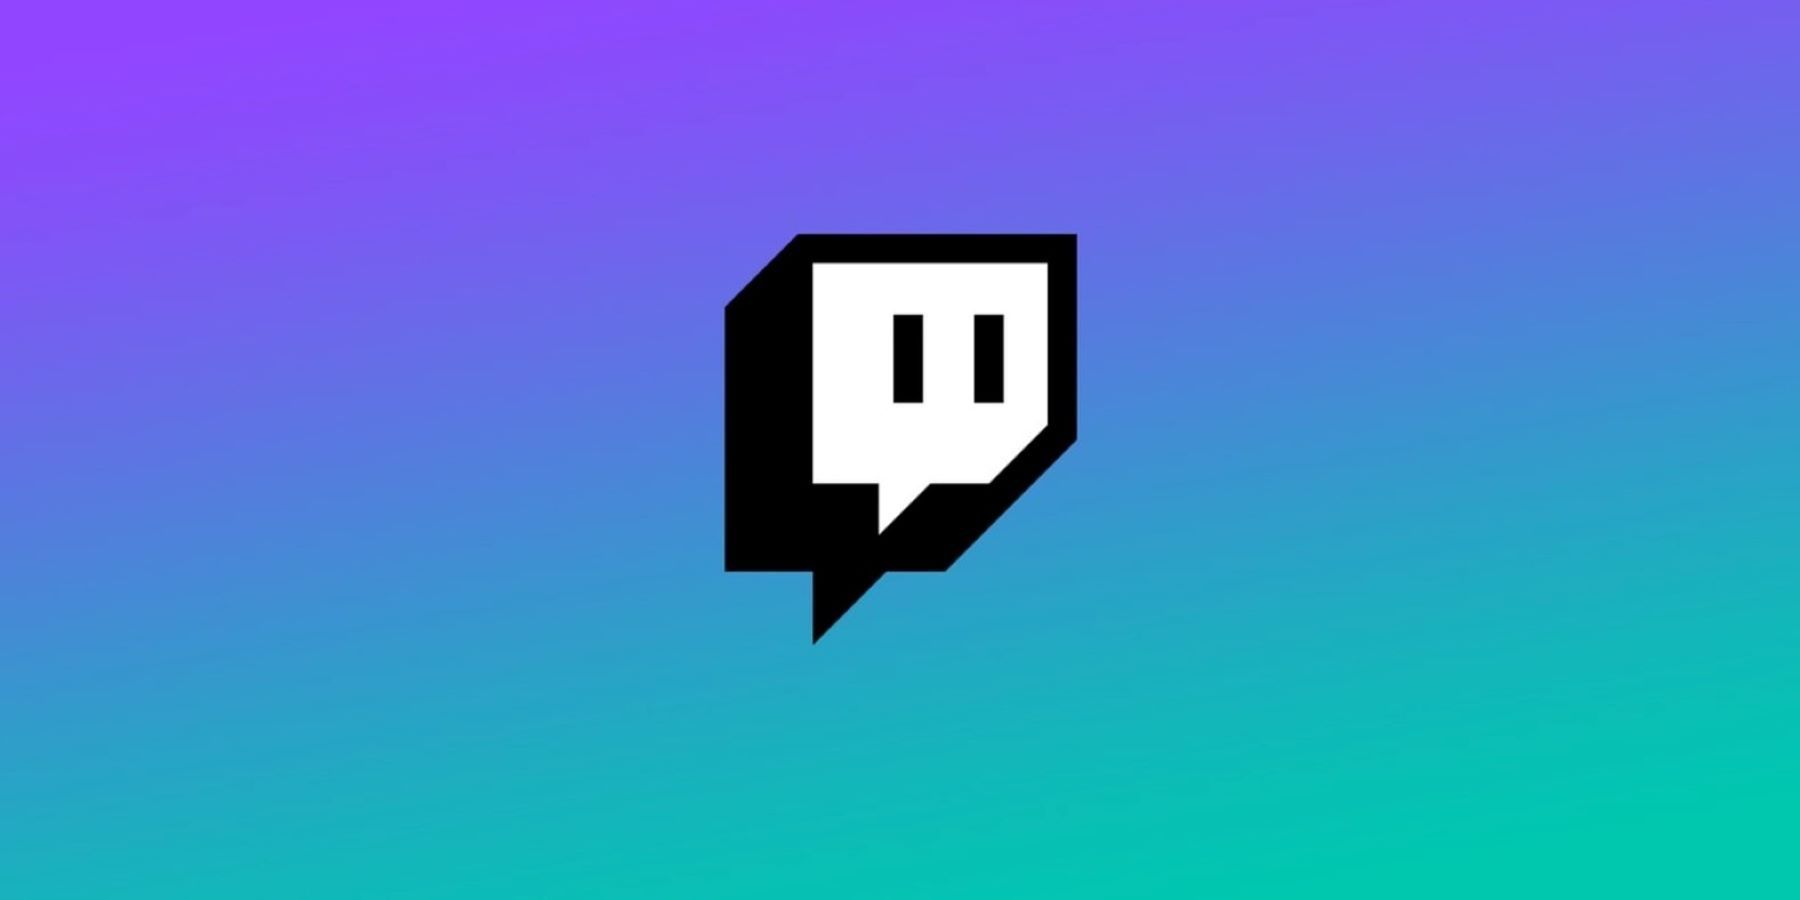 The Twitch logo on a purple and cyan background